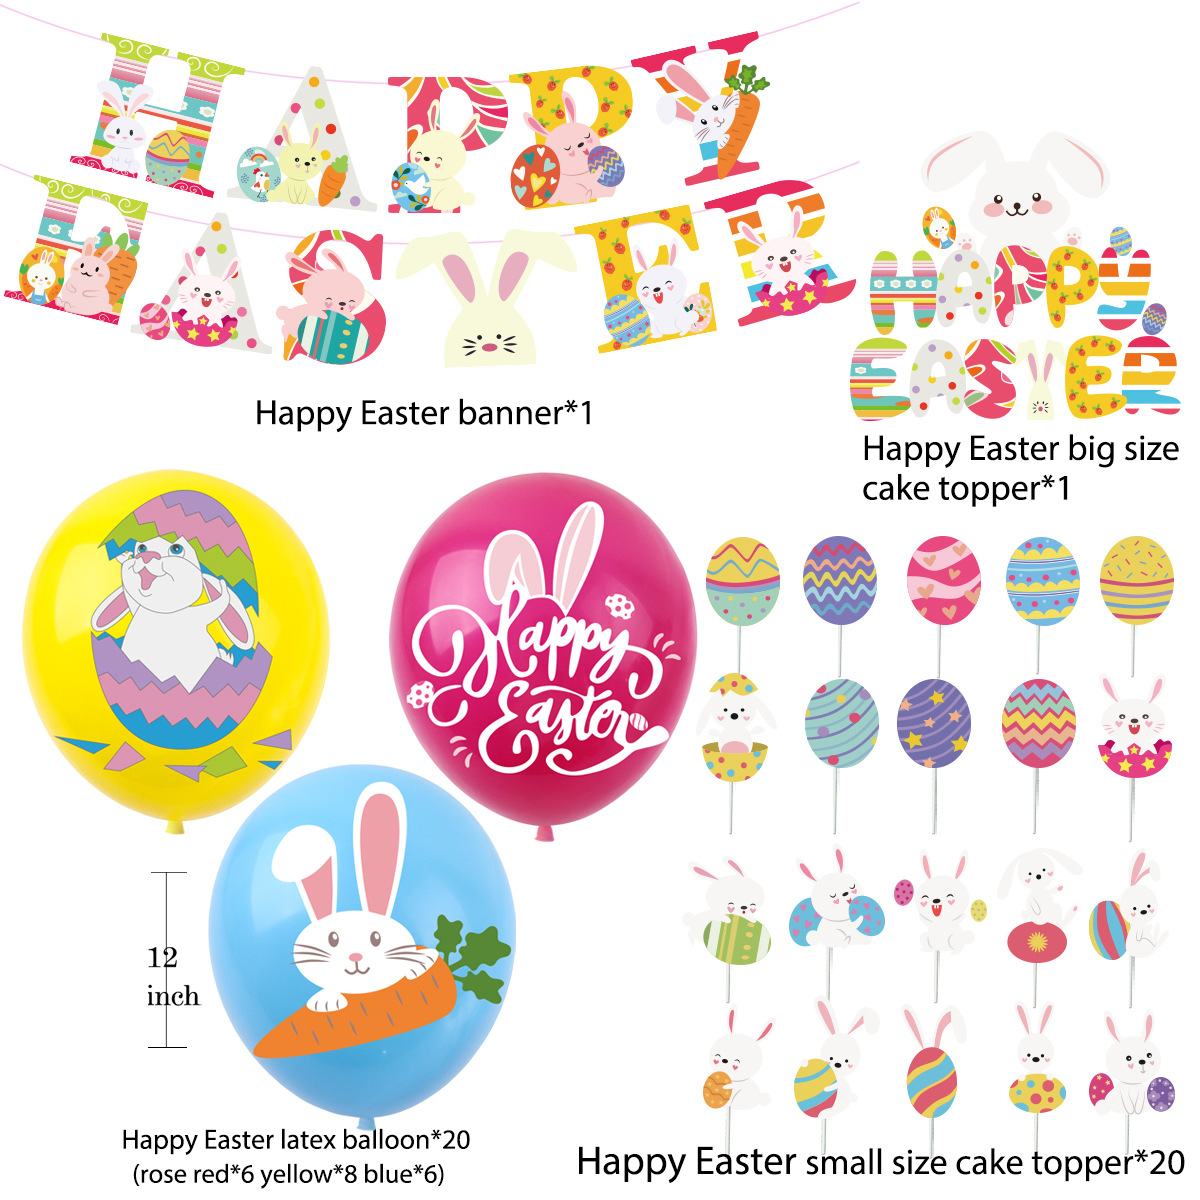 Easter Party Decorations Set, Includes Happy Easter Banner, Easter Egg Bunny balloon 20pcs Decorations,cake topper big size 1pc and small size 20pcs for Home Office School - Easter Party Ornaments Favors Supplies